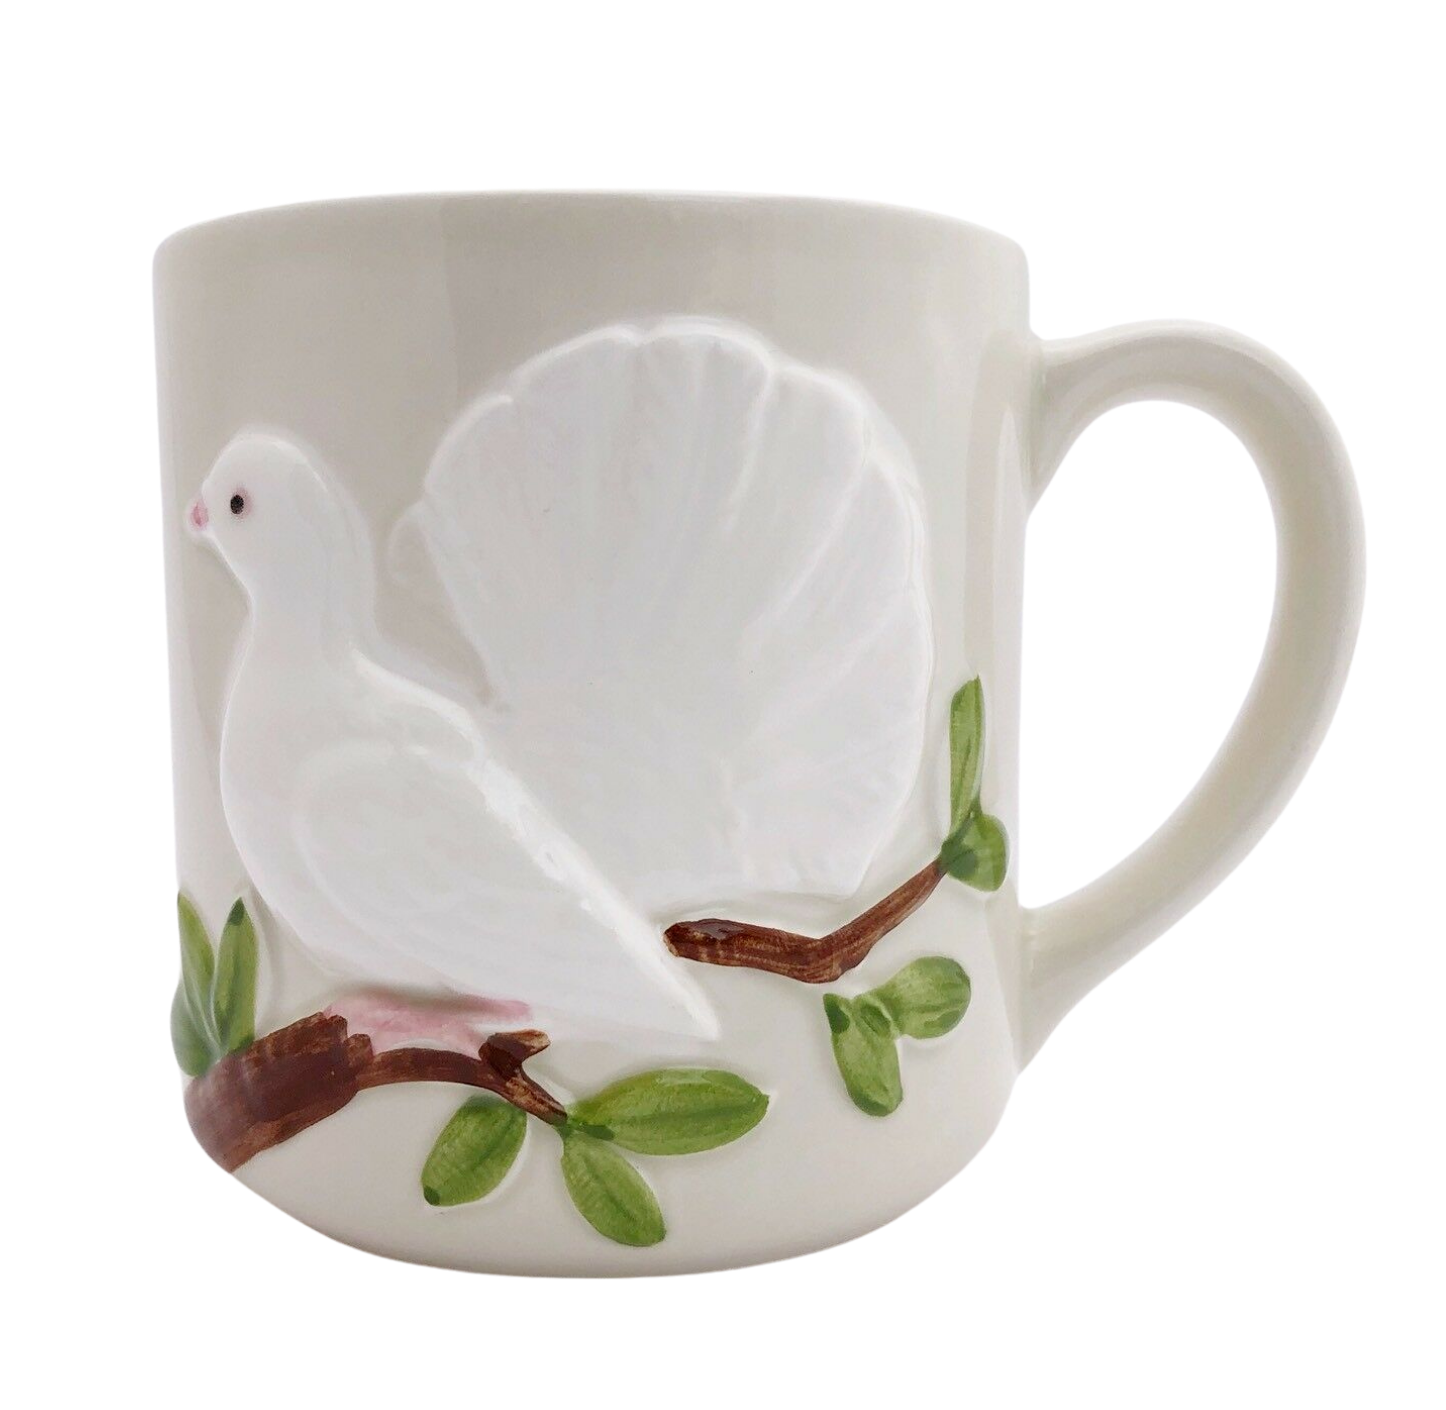 Primary image for Vintage Coffee Mug 3D Ceramic Art White Peace Dove on Branch